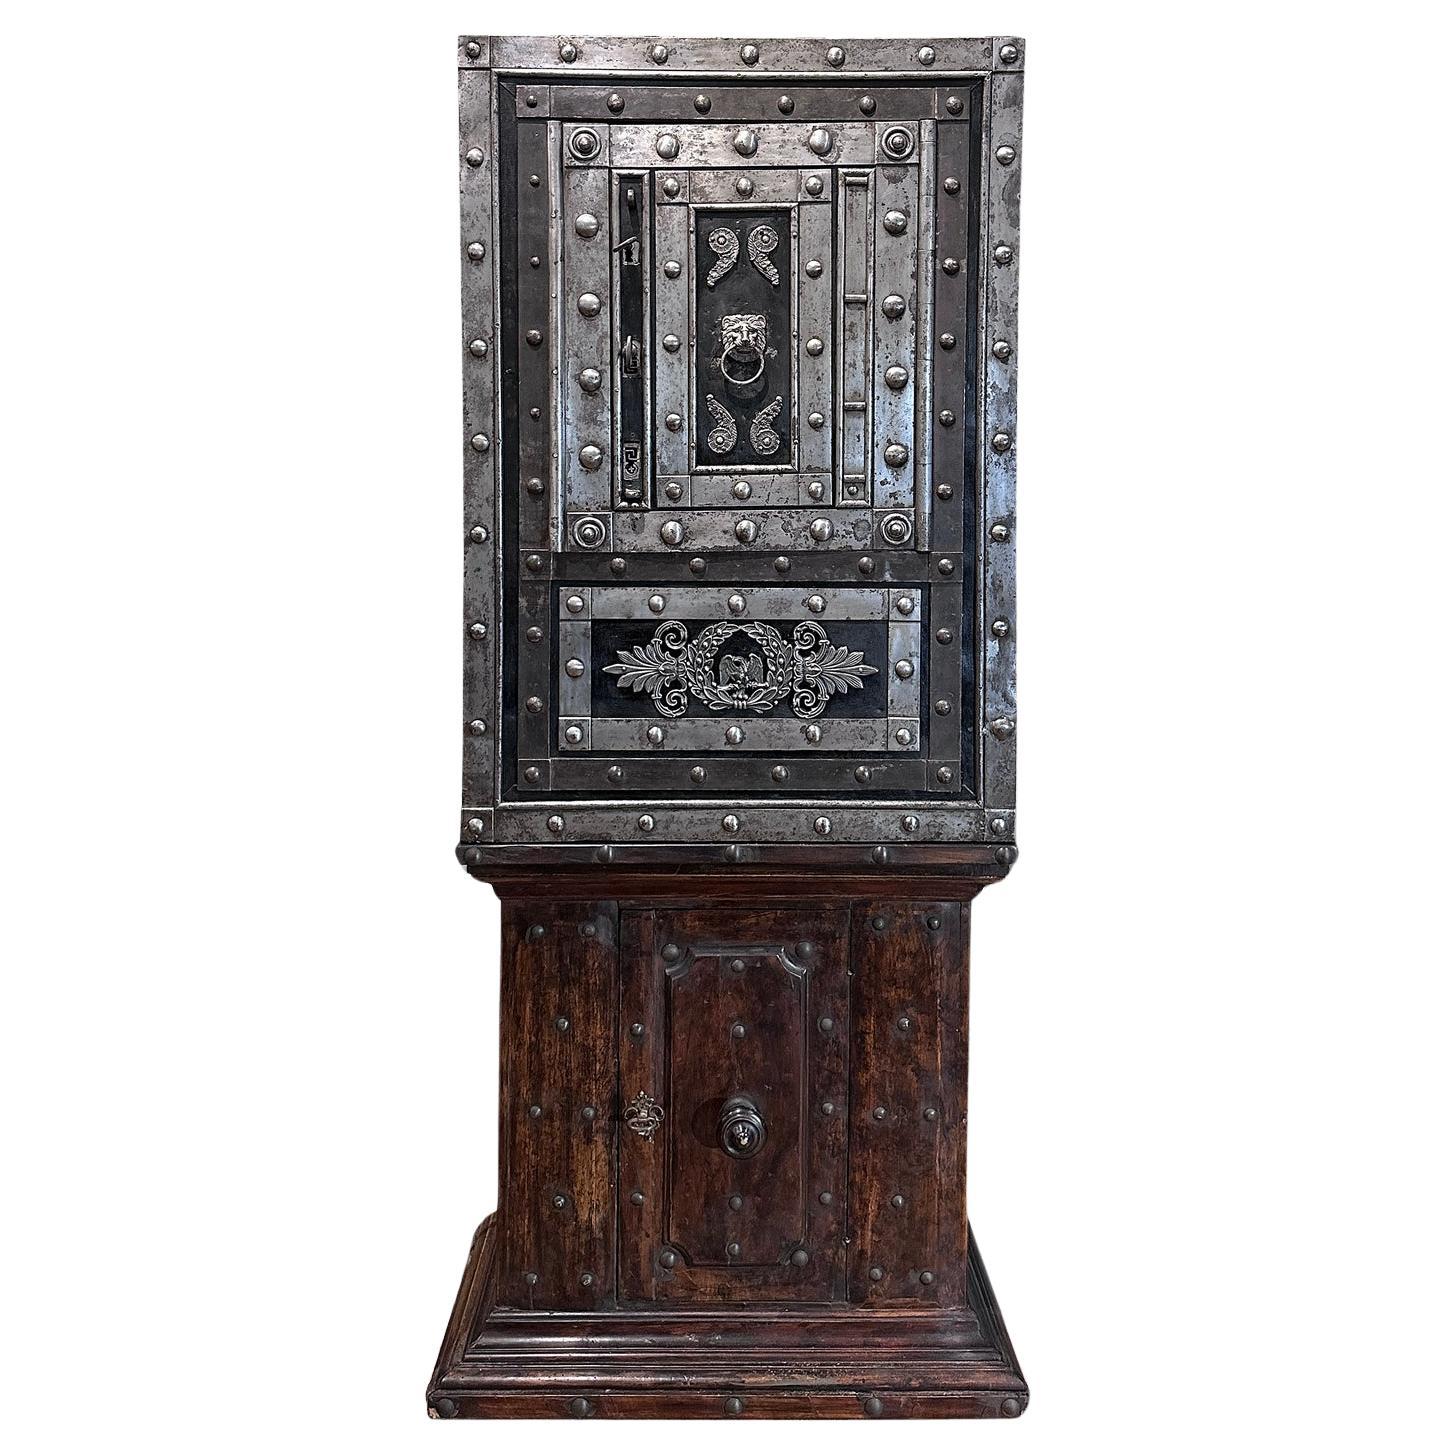 END OF 18th - EARLY 19th CENTURY IRON SAFE  For Sale